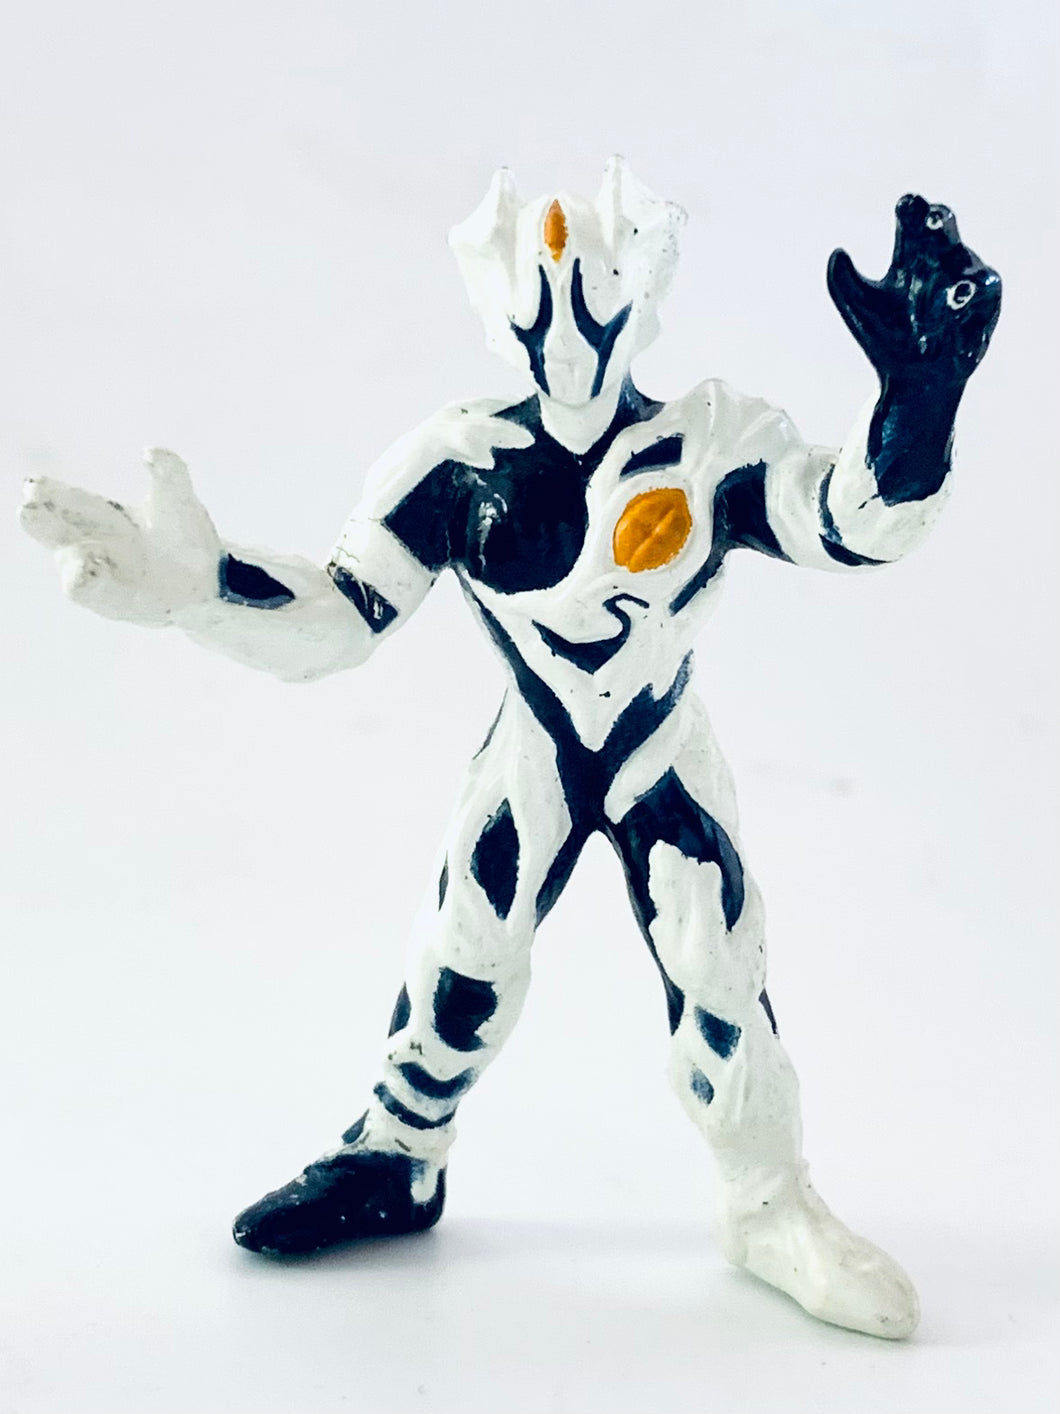 Ultraman Tiga - Alien Kyrieloid - Monsters from Tiga - Monster Super Complete Works Ep. 1-5